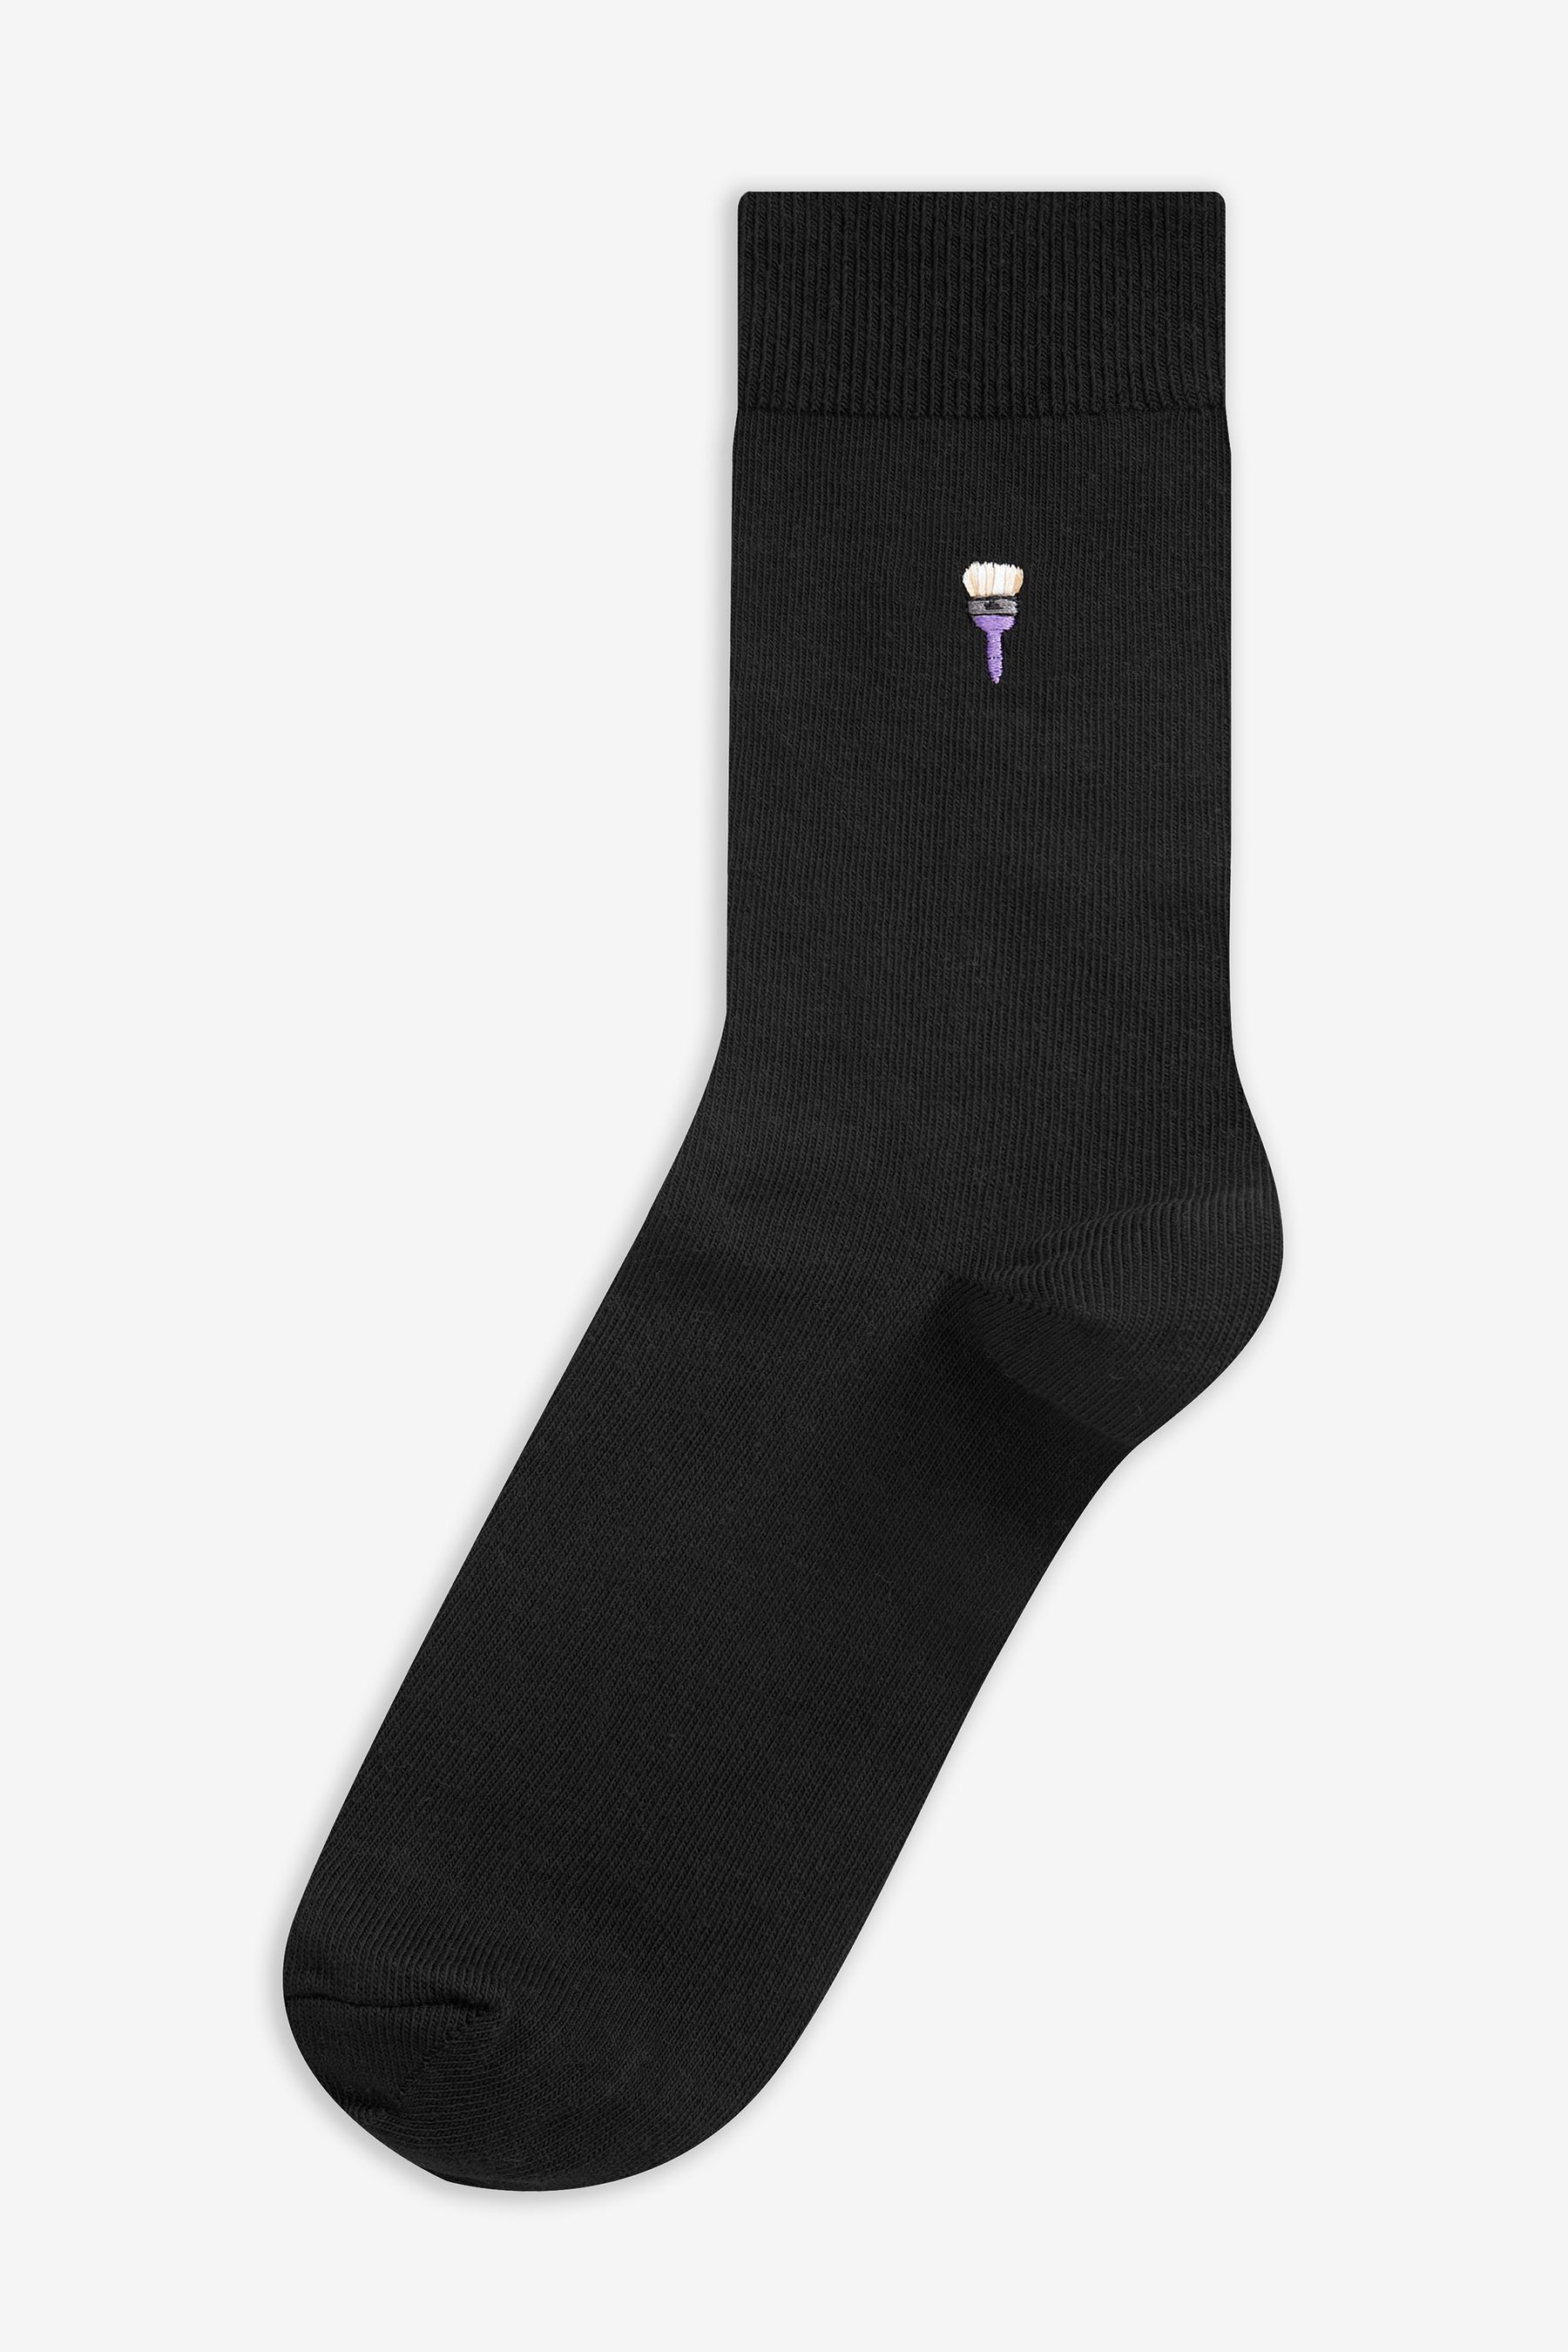 Buy Embroidered Socks from Next Australia